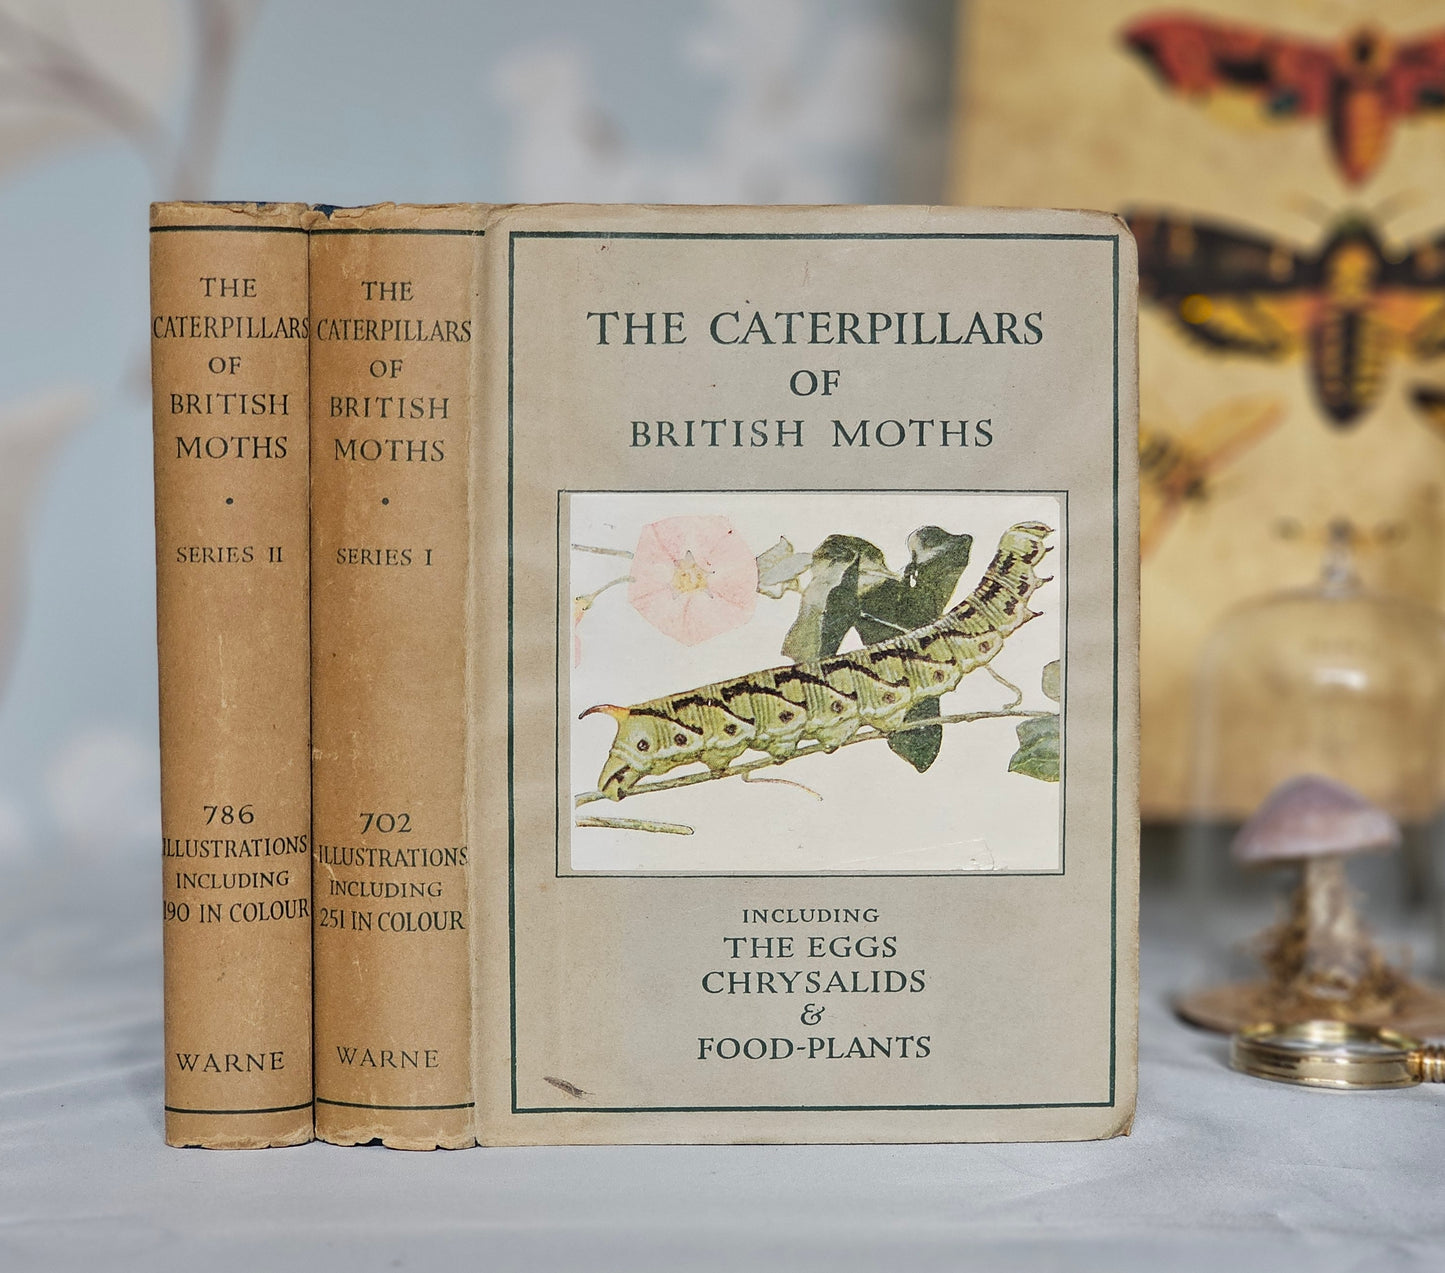 1948 The Caterpillars of the Moths / Frederick Warne & Co, Ltd / Numerous Illustrations in Colour and BW / Scarce Dust Jackets